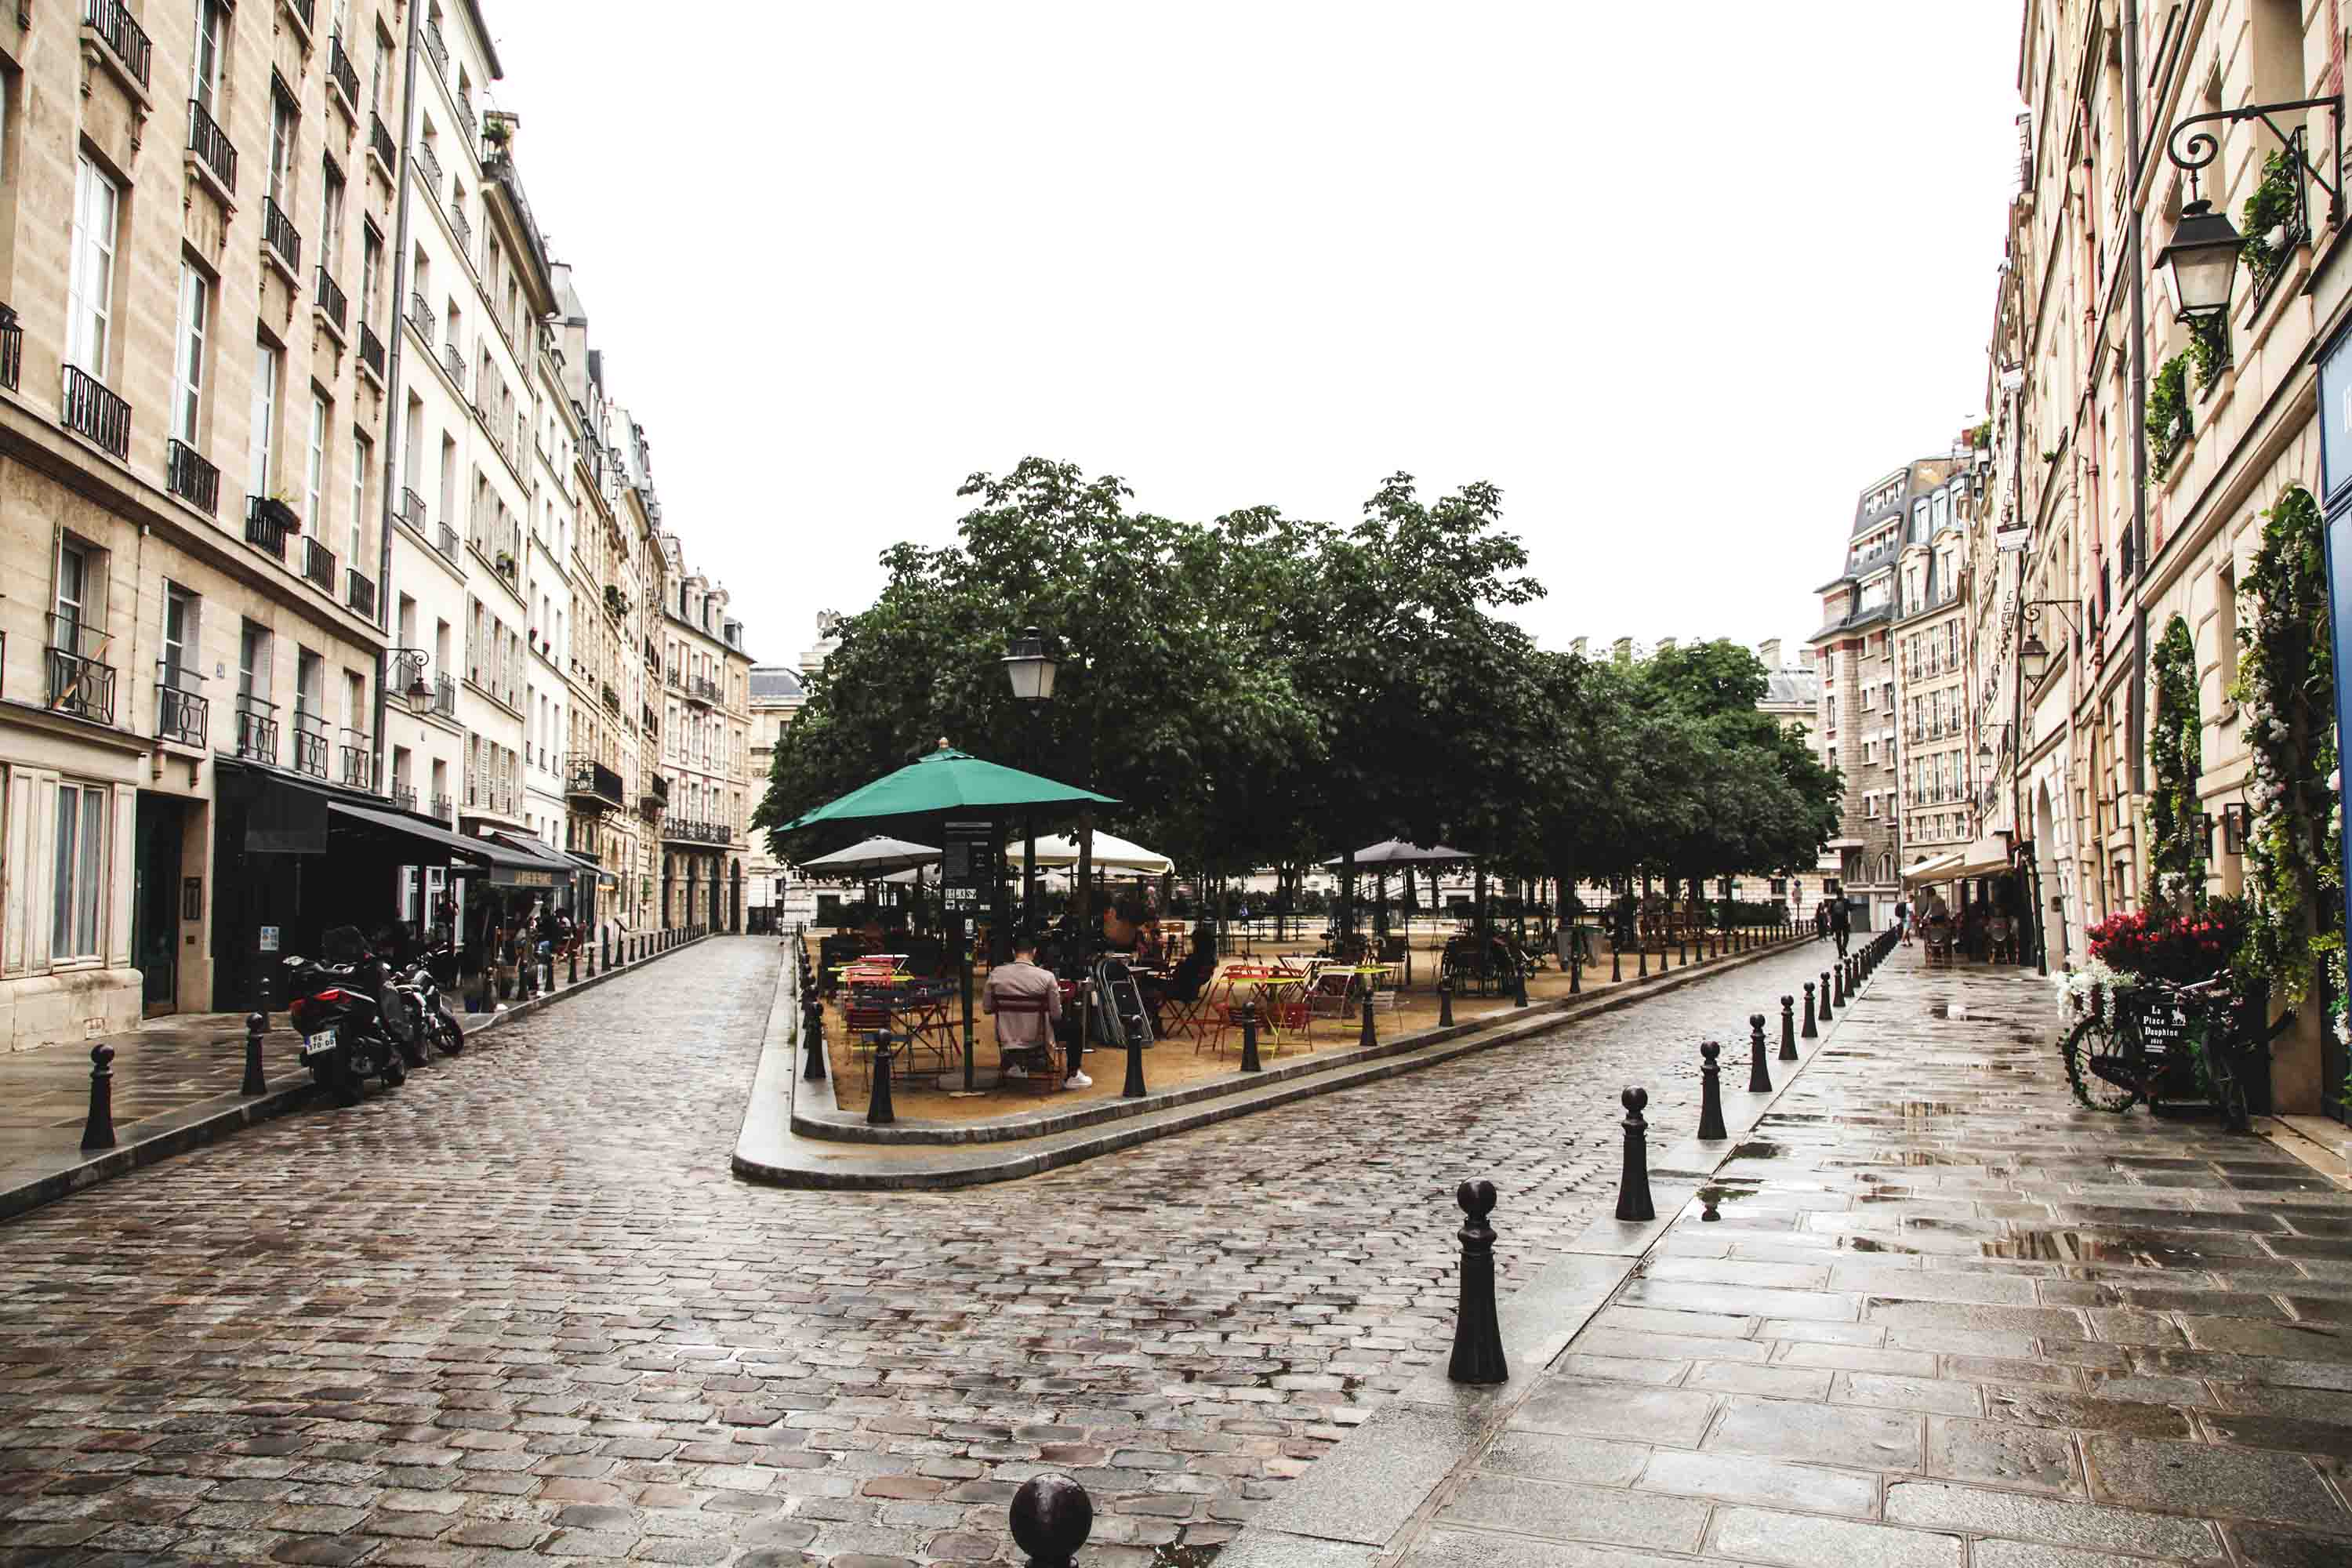 Why is Place Dauphine nicknamed “the sex of Paris”?